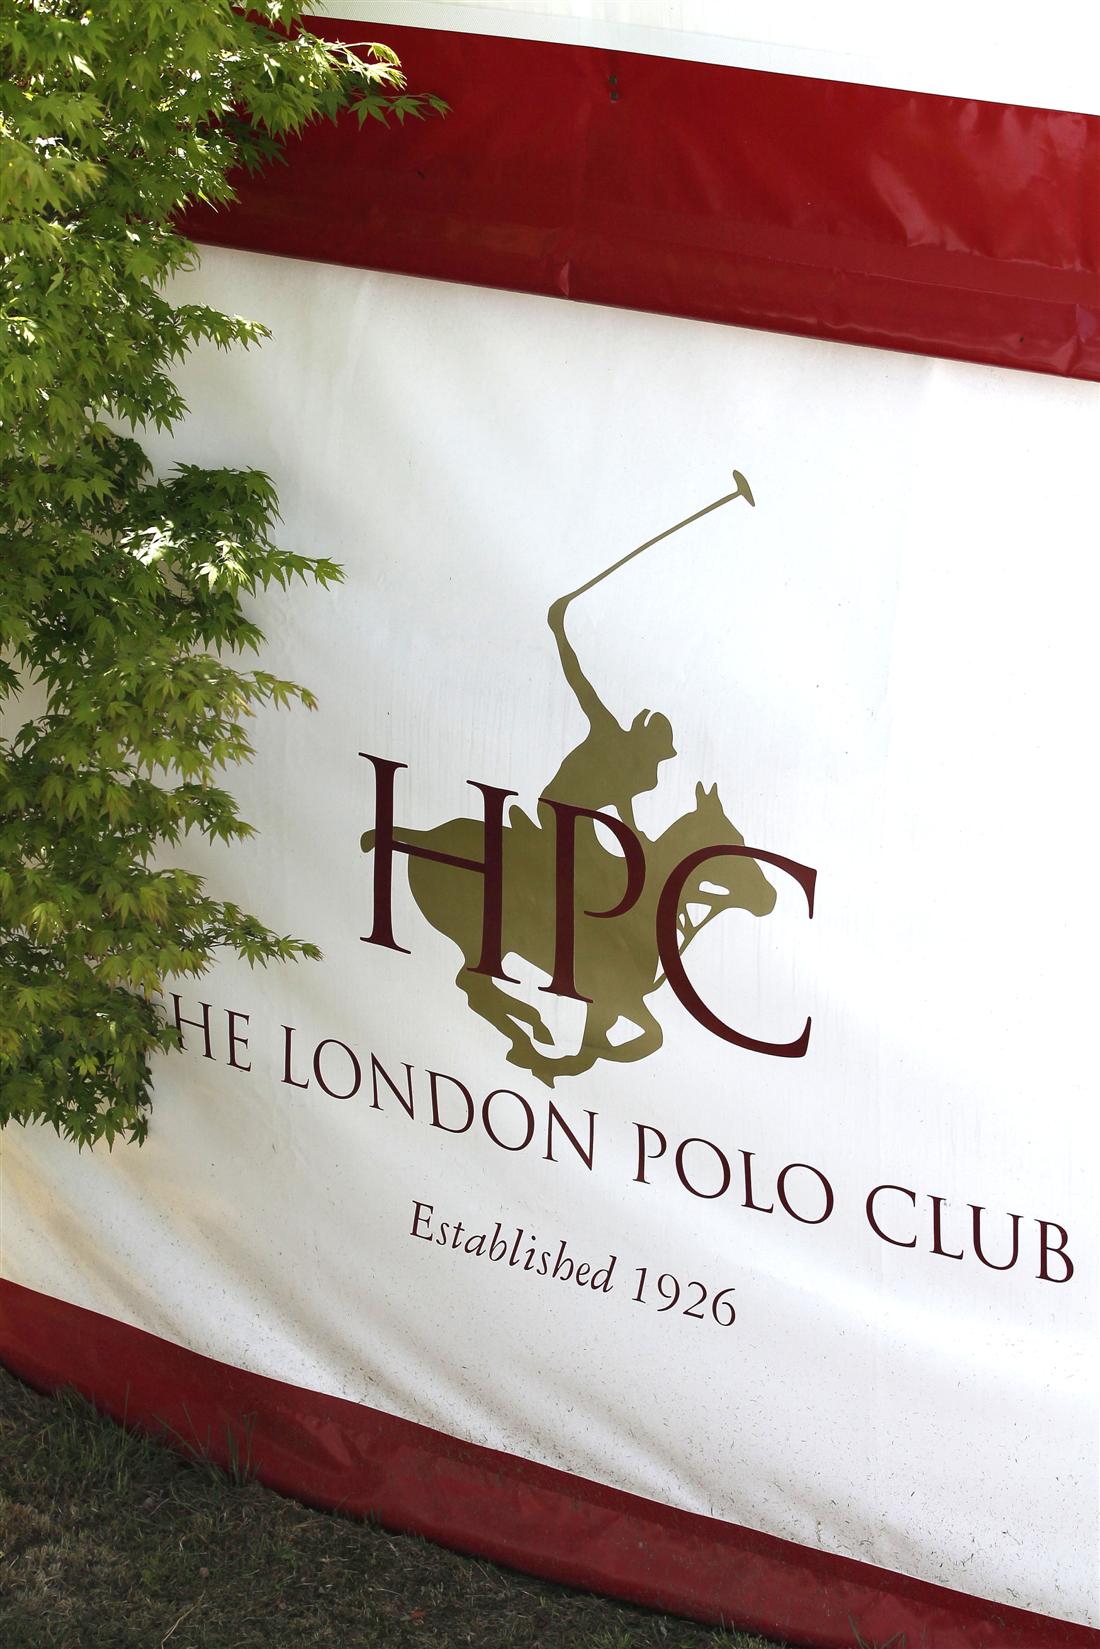 Pictures from last Sunday at Ham Polo Club